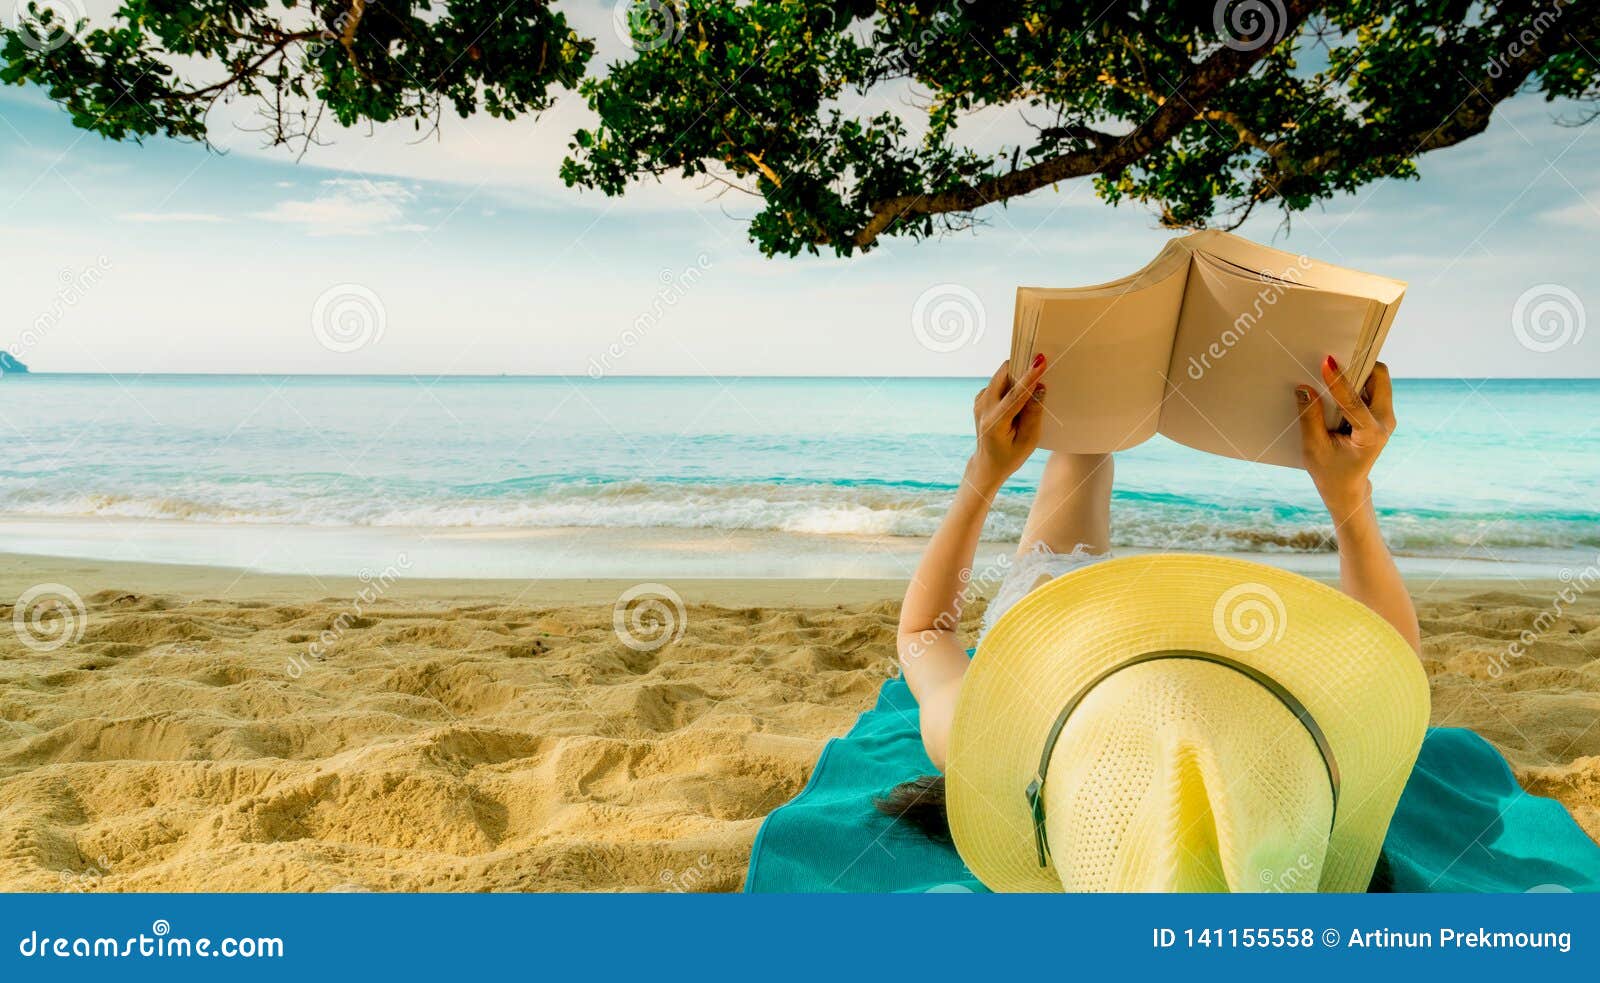 woman lie down on green towel that put on sand beach under the tree and reading a book. slow life on summer vacation. asian woman